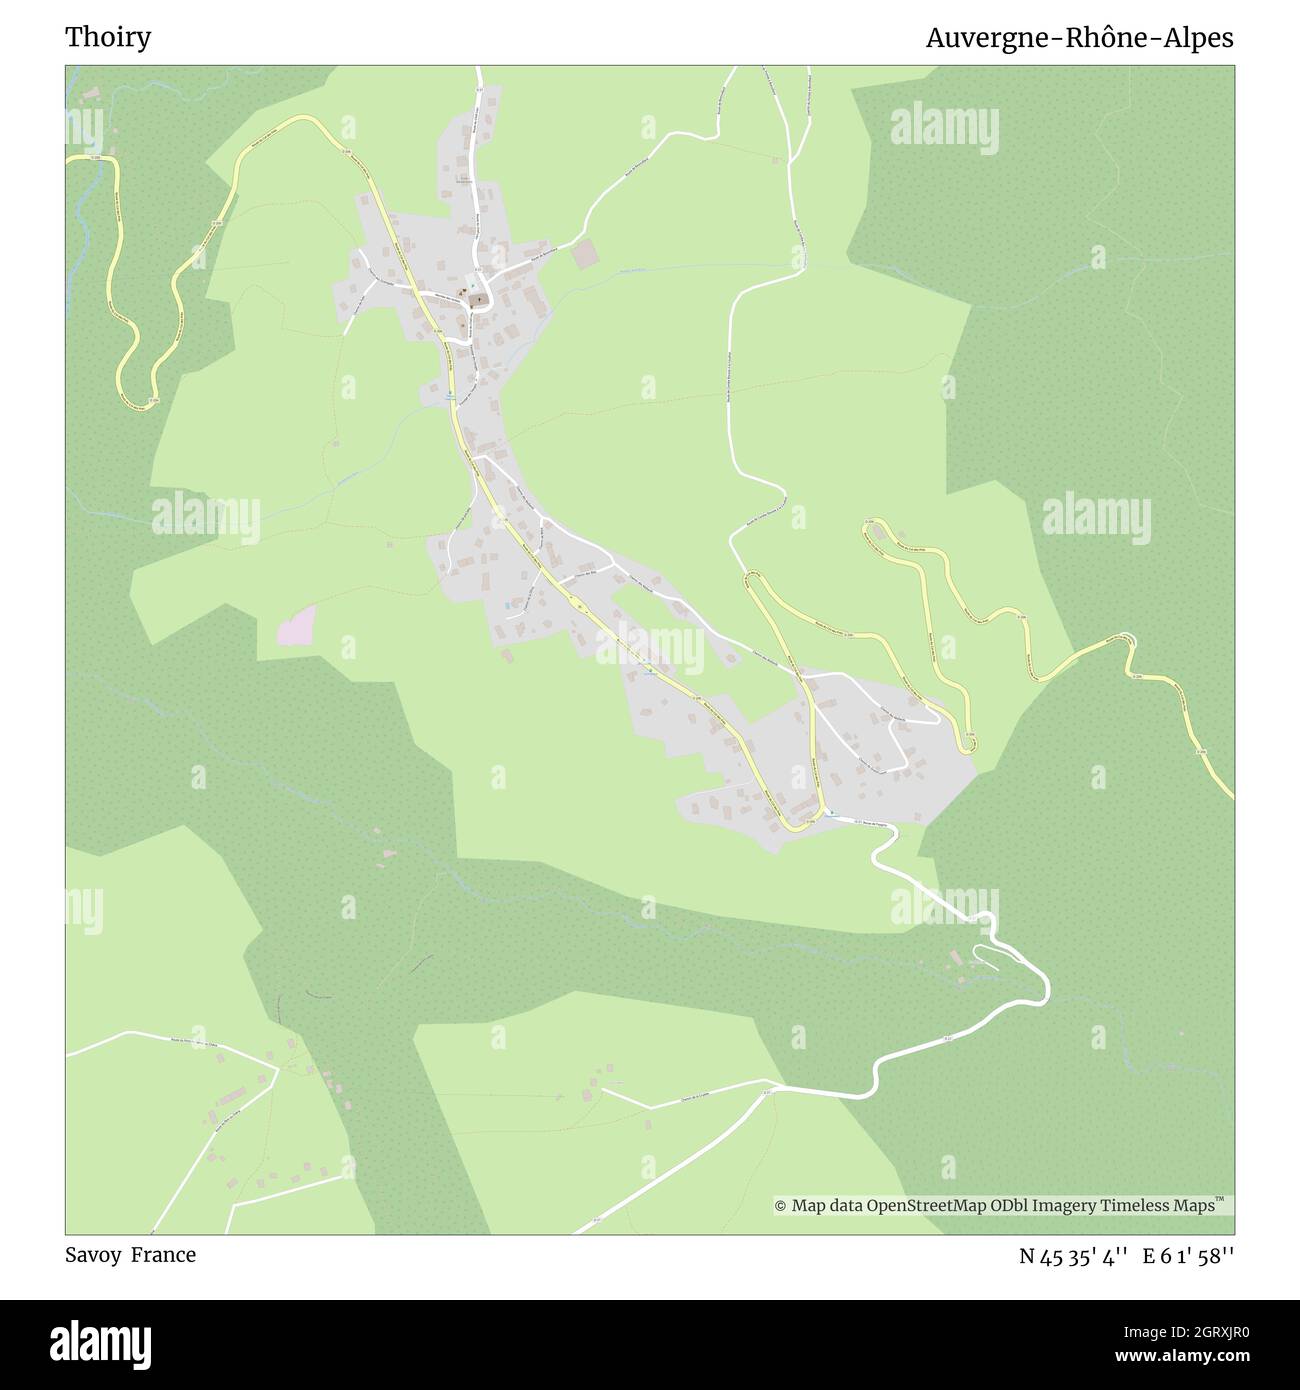 Thoiry, Savoy, France, Auvergne-Rhône-Alpes, N 45 35' 4'', E 6 1' 58'', map, Timeless Map published in 2021. Travelers, explorers and adventurers like Florence Nightingale, David Livingstone, Ernest Shackleton, Lewis and Clark and Sherlock Holmes relied on maps to plan travels to the world's most remote corners, Timeless Maps is mapping most locations on the globe, showing the achievement of great dreams Stock Photo